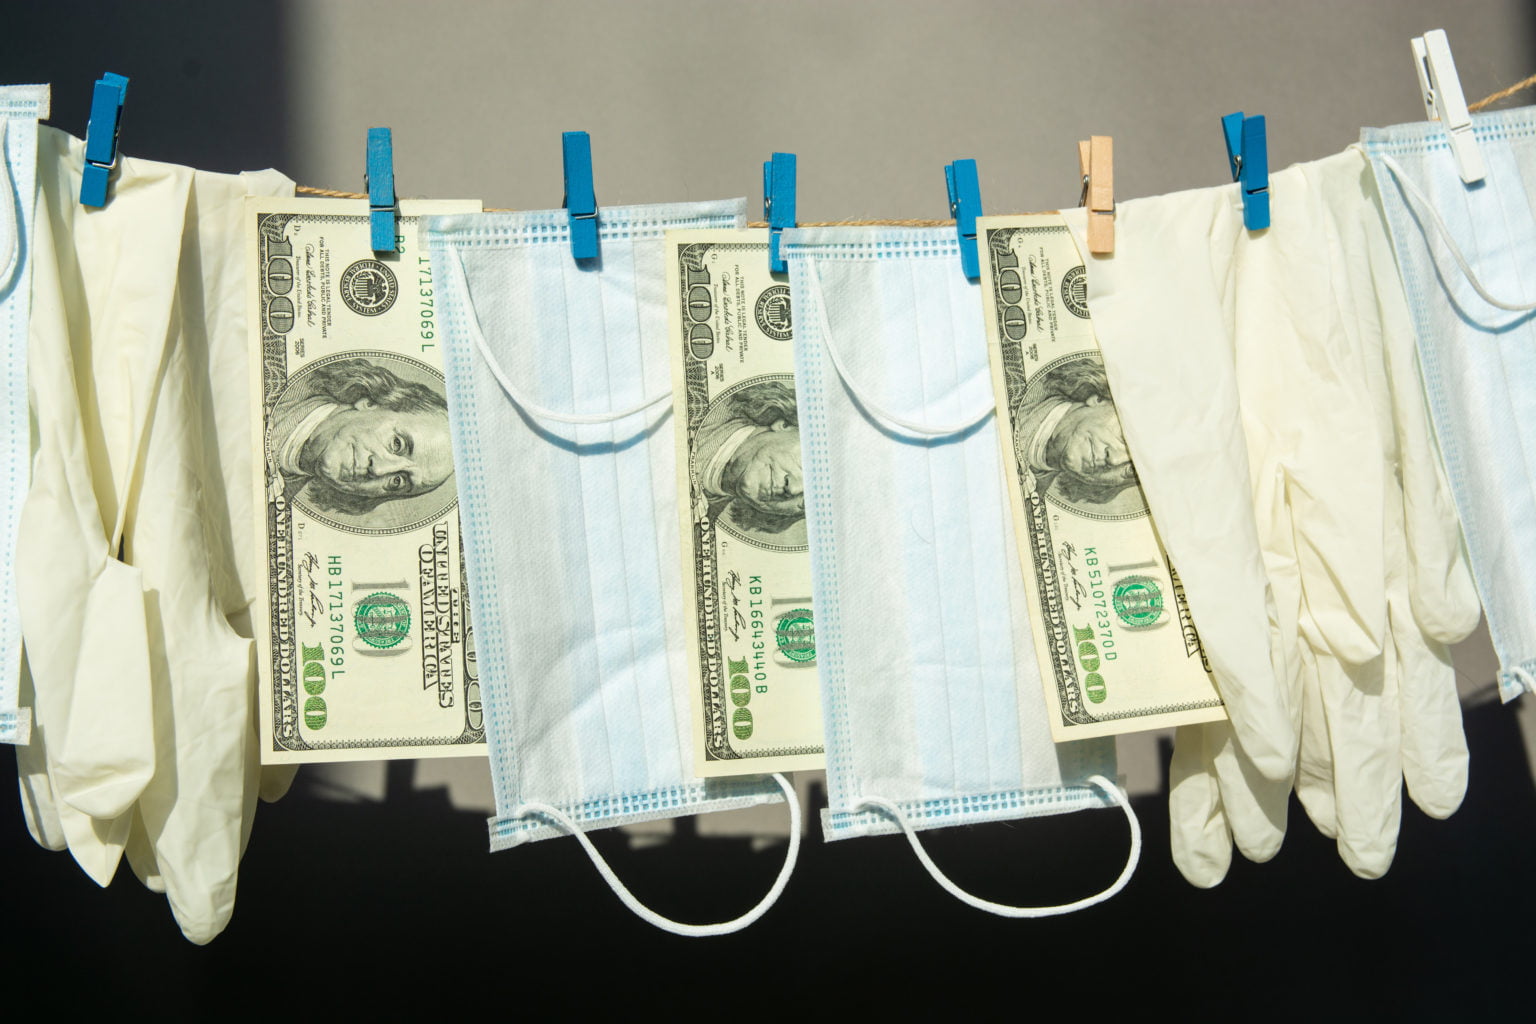 100 dollar bills, COVID masks and latex gloves on a clothes line